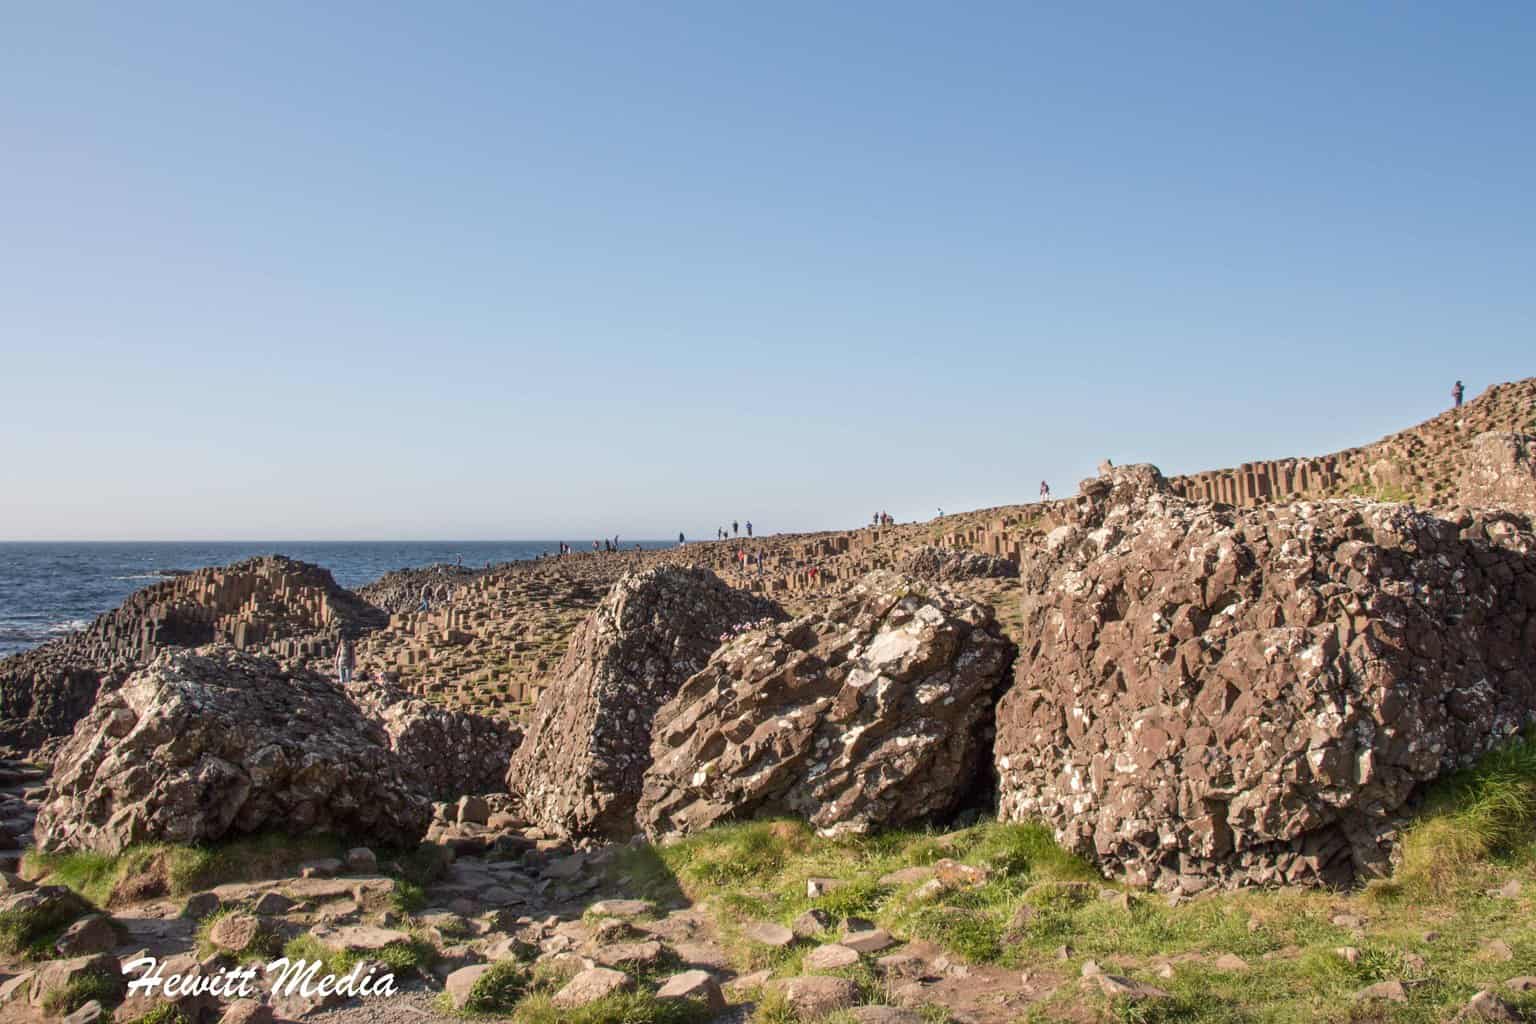 The Giant’s Causeway Visitor Guide